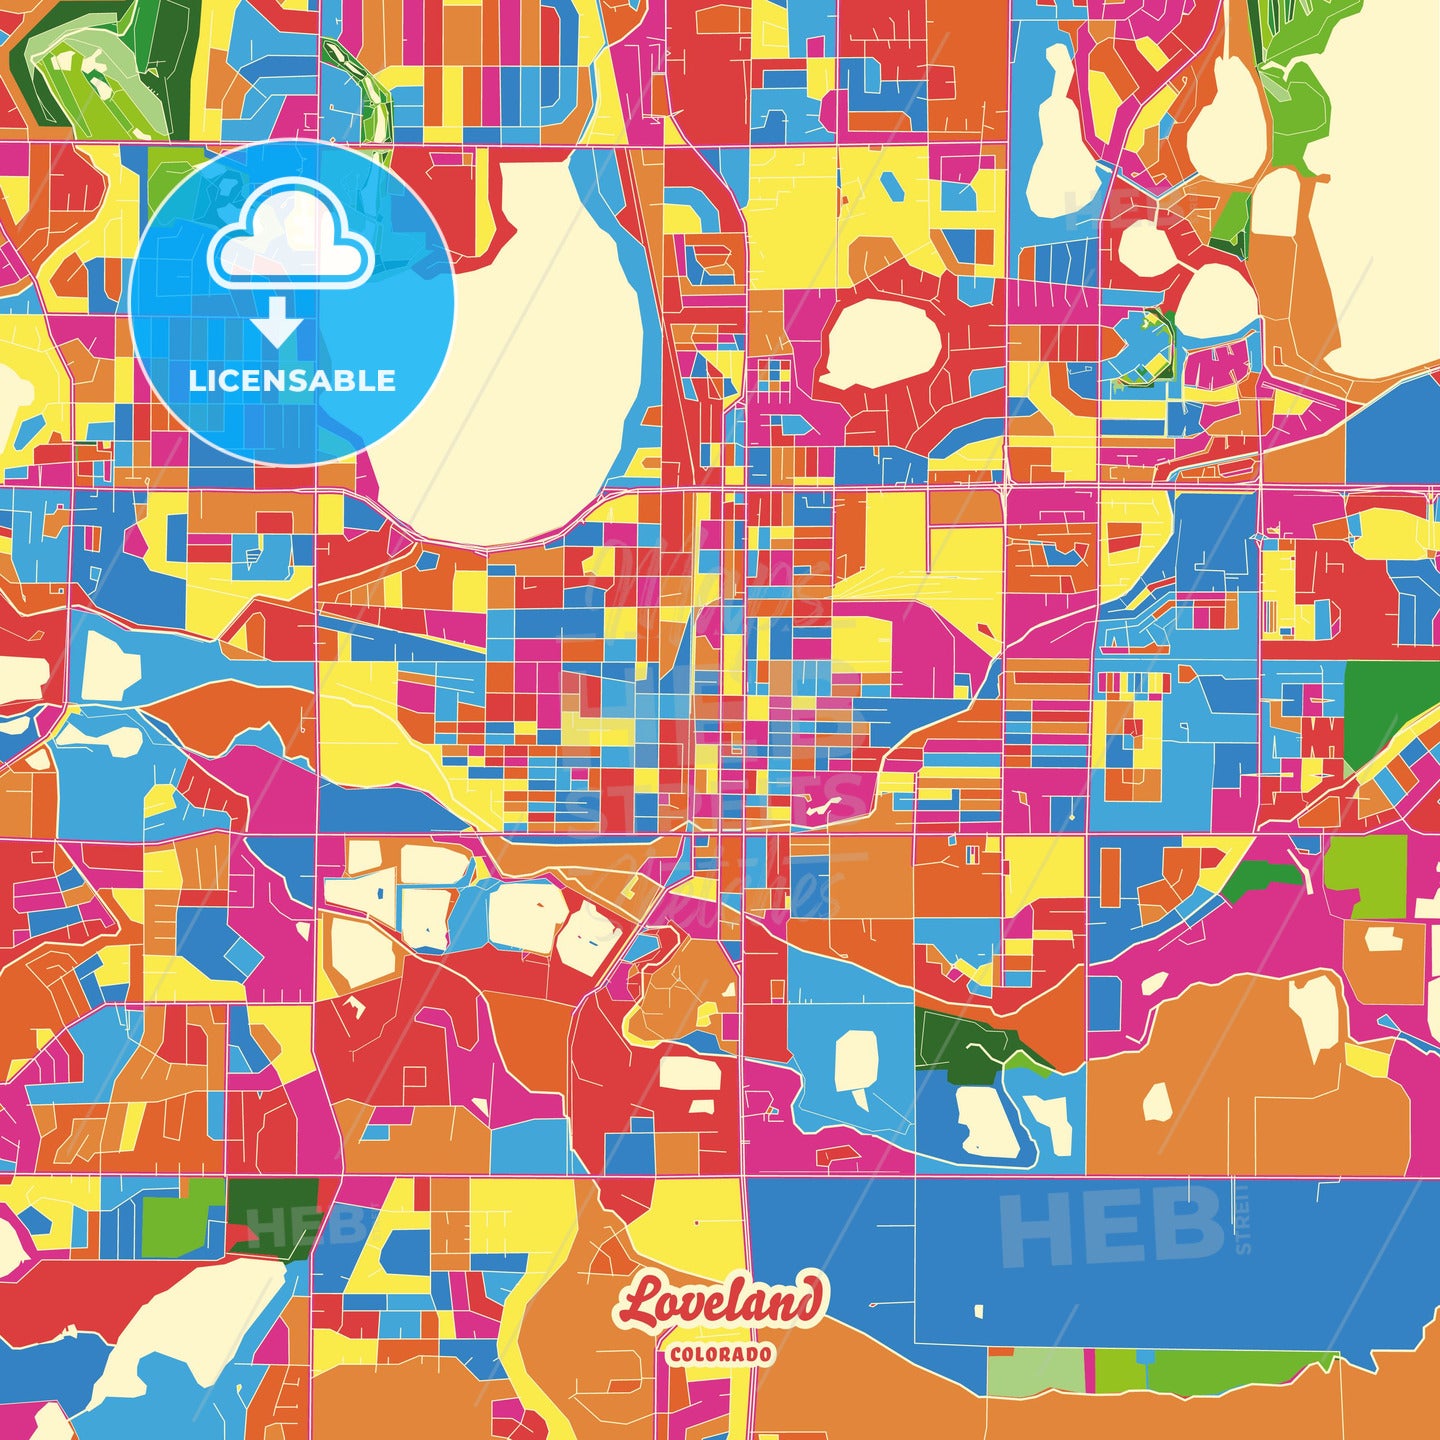 Loveland, United States Crazy Colorful Street Map Poster Template - HEBSTREITS Sketches